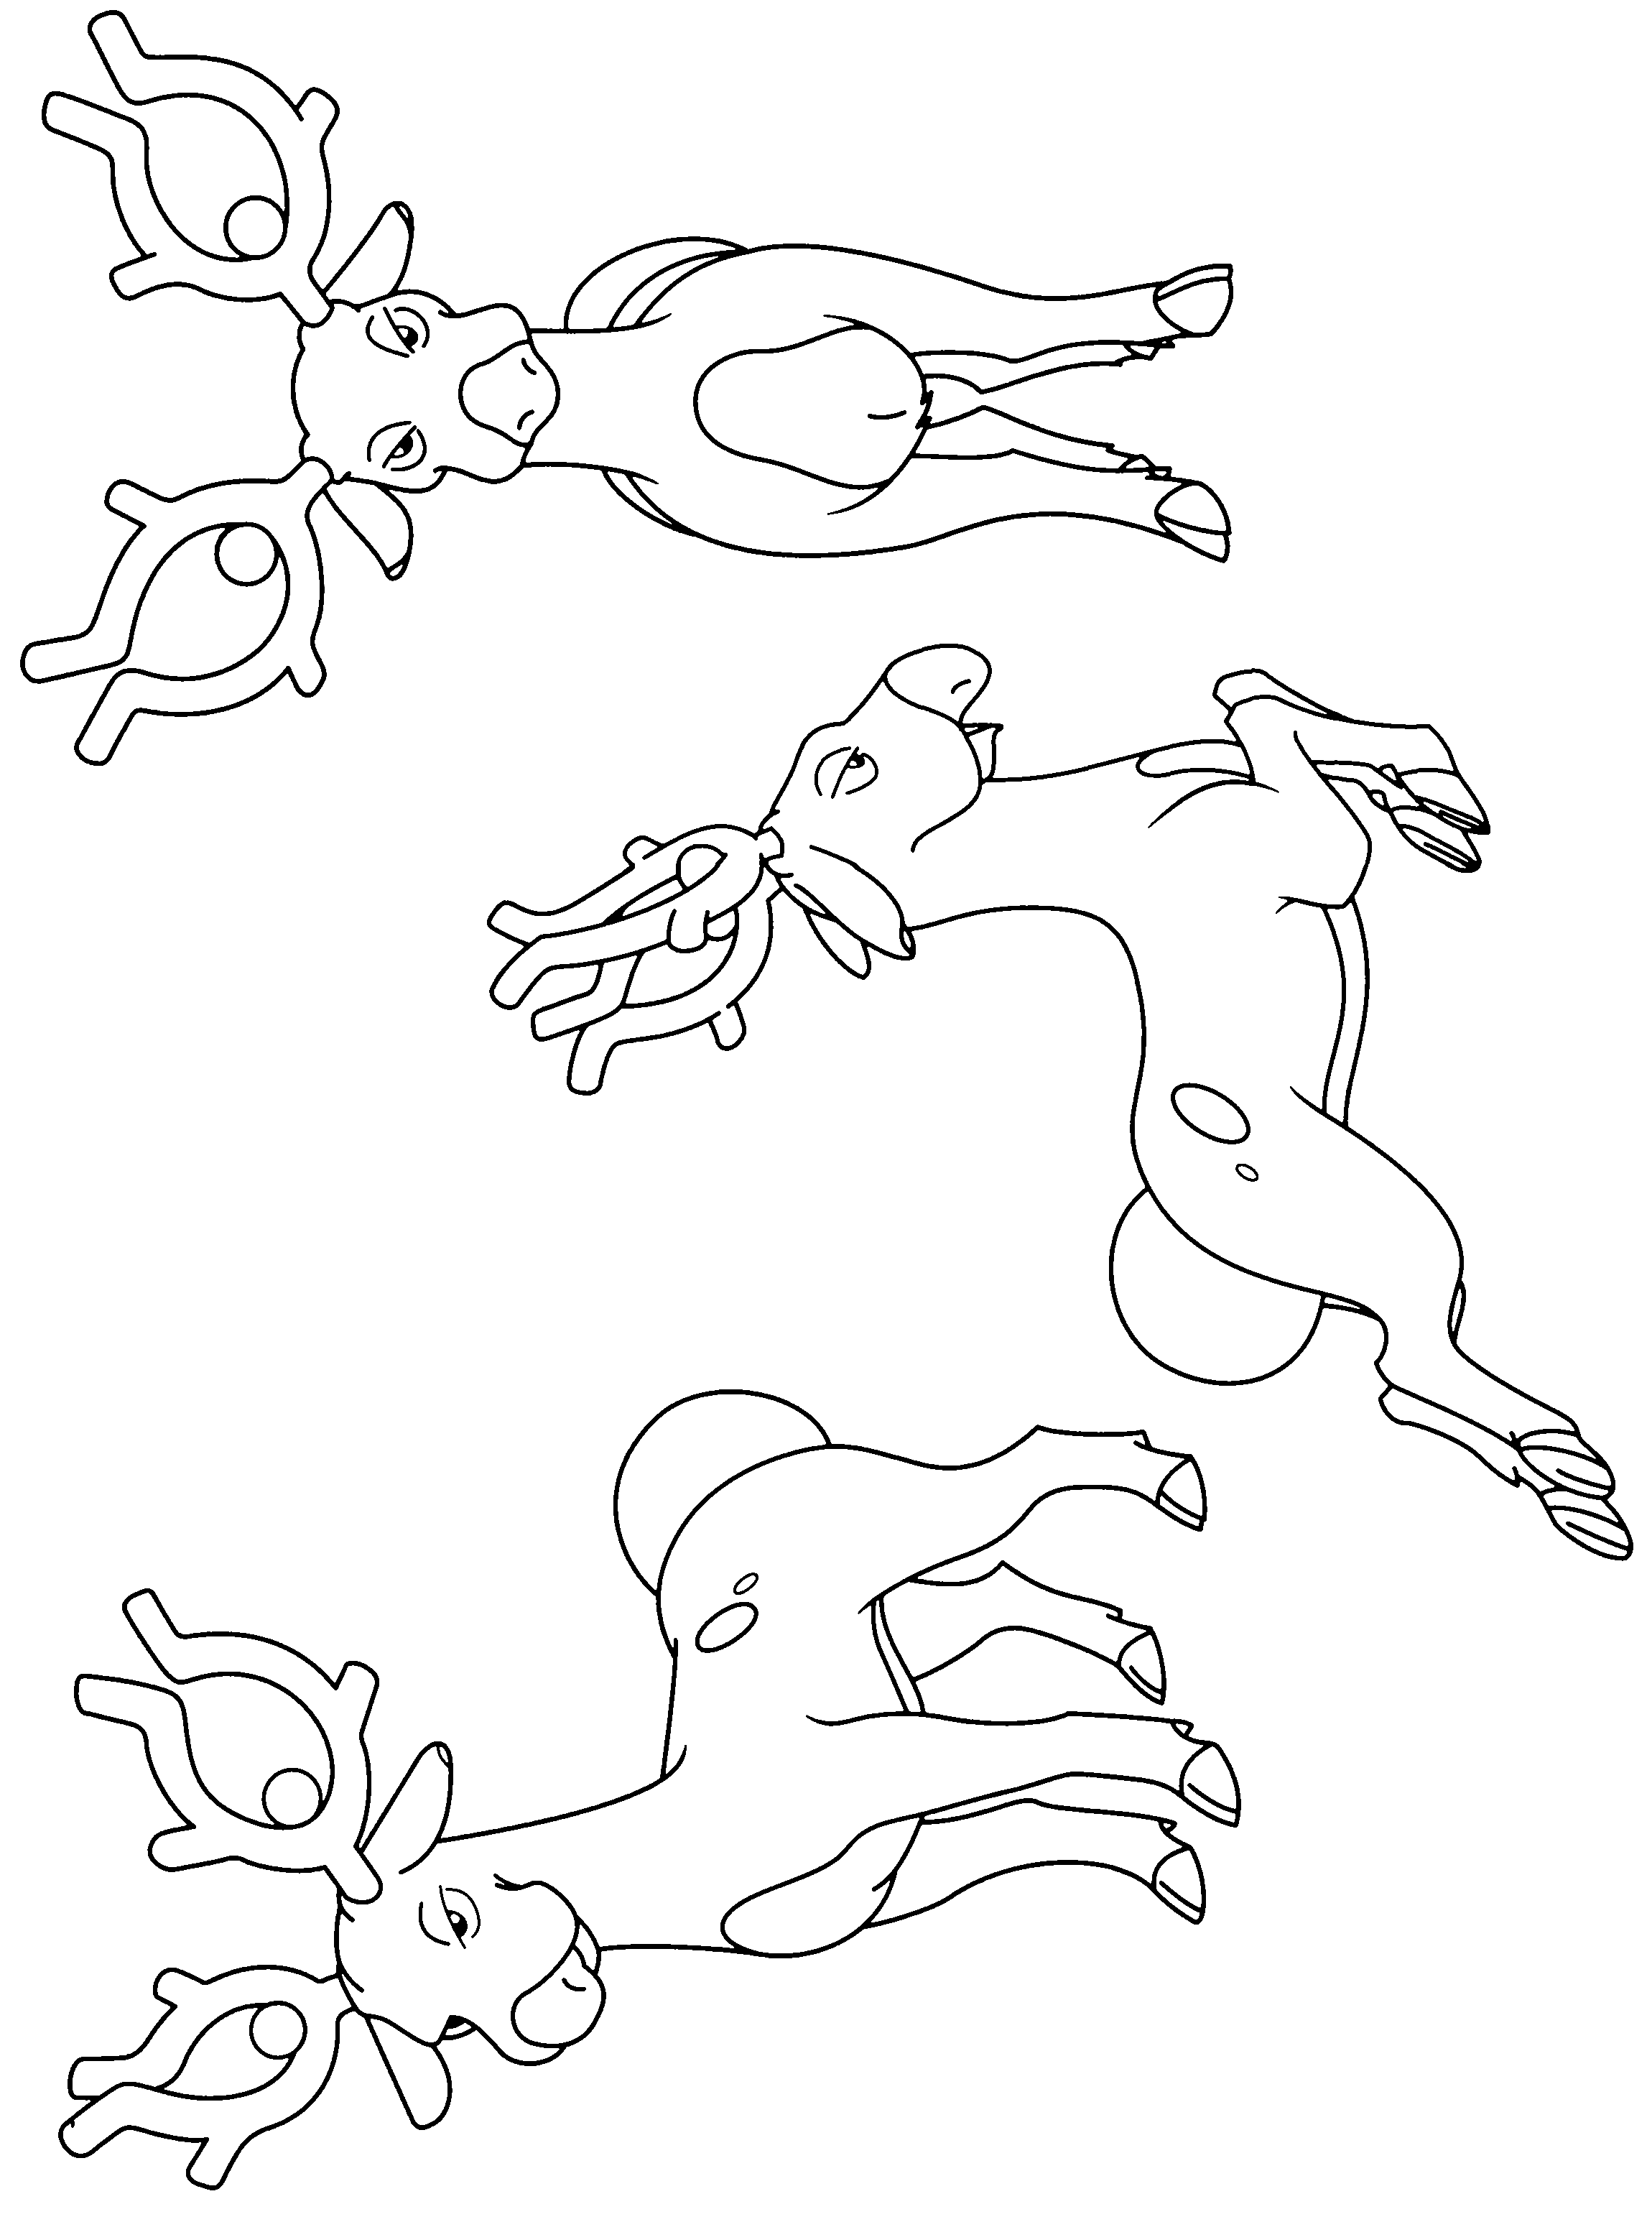 animated-coloring-pages-pokemon-image-0108